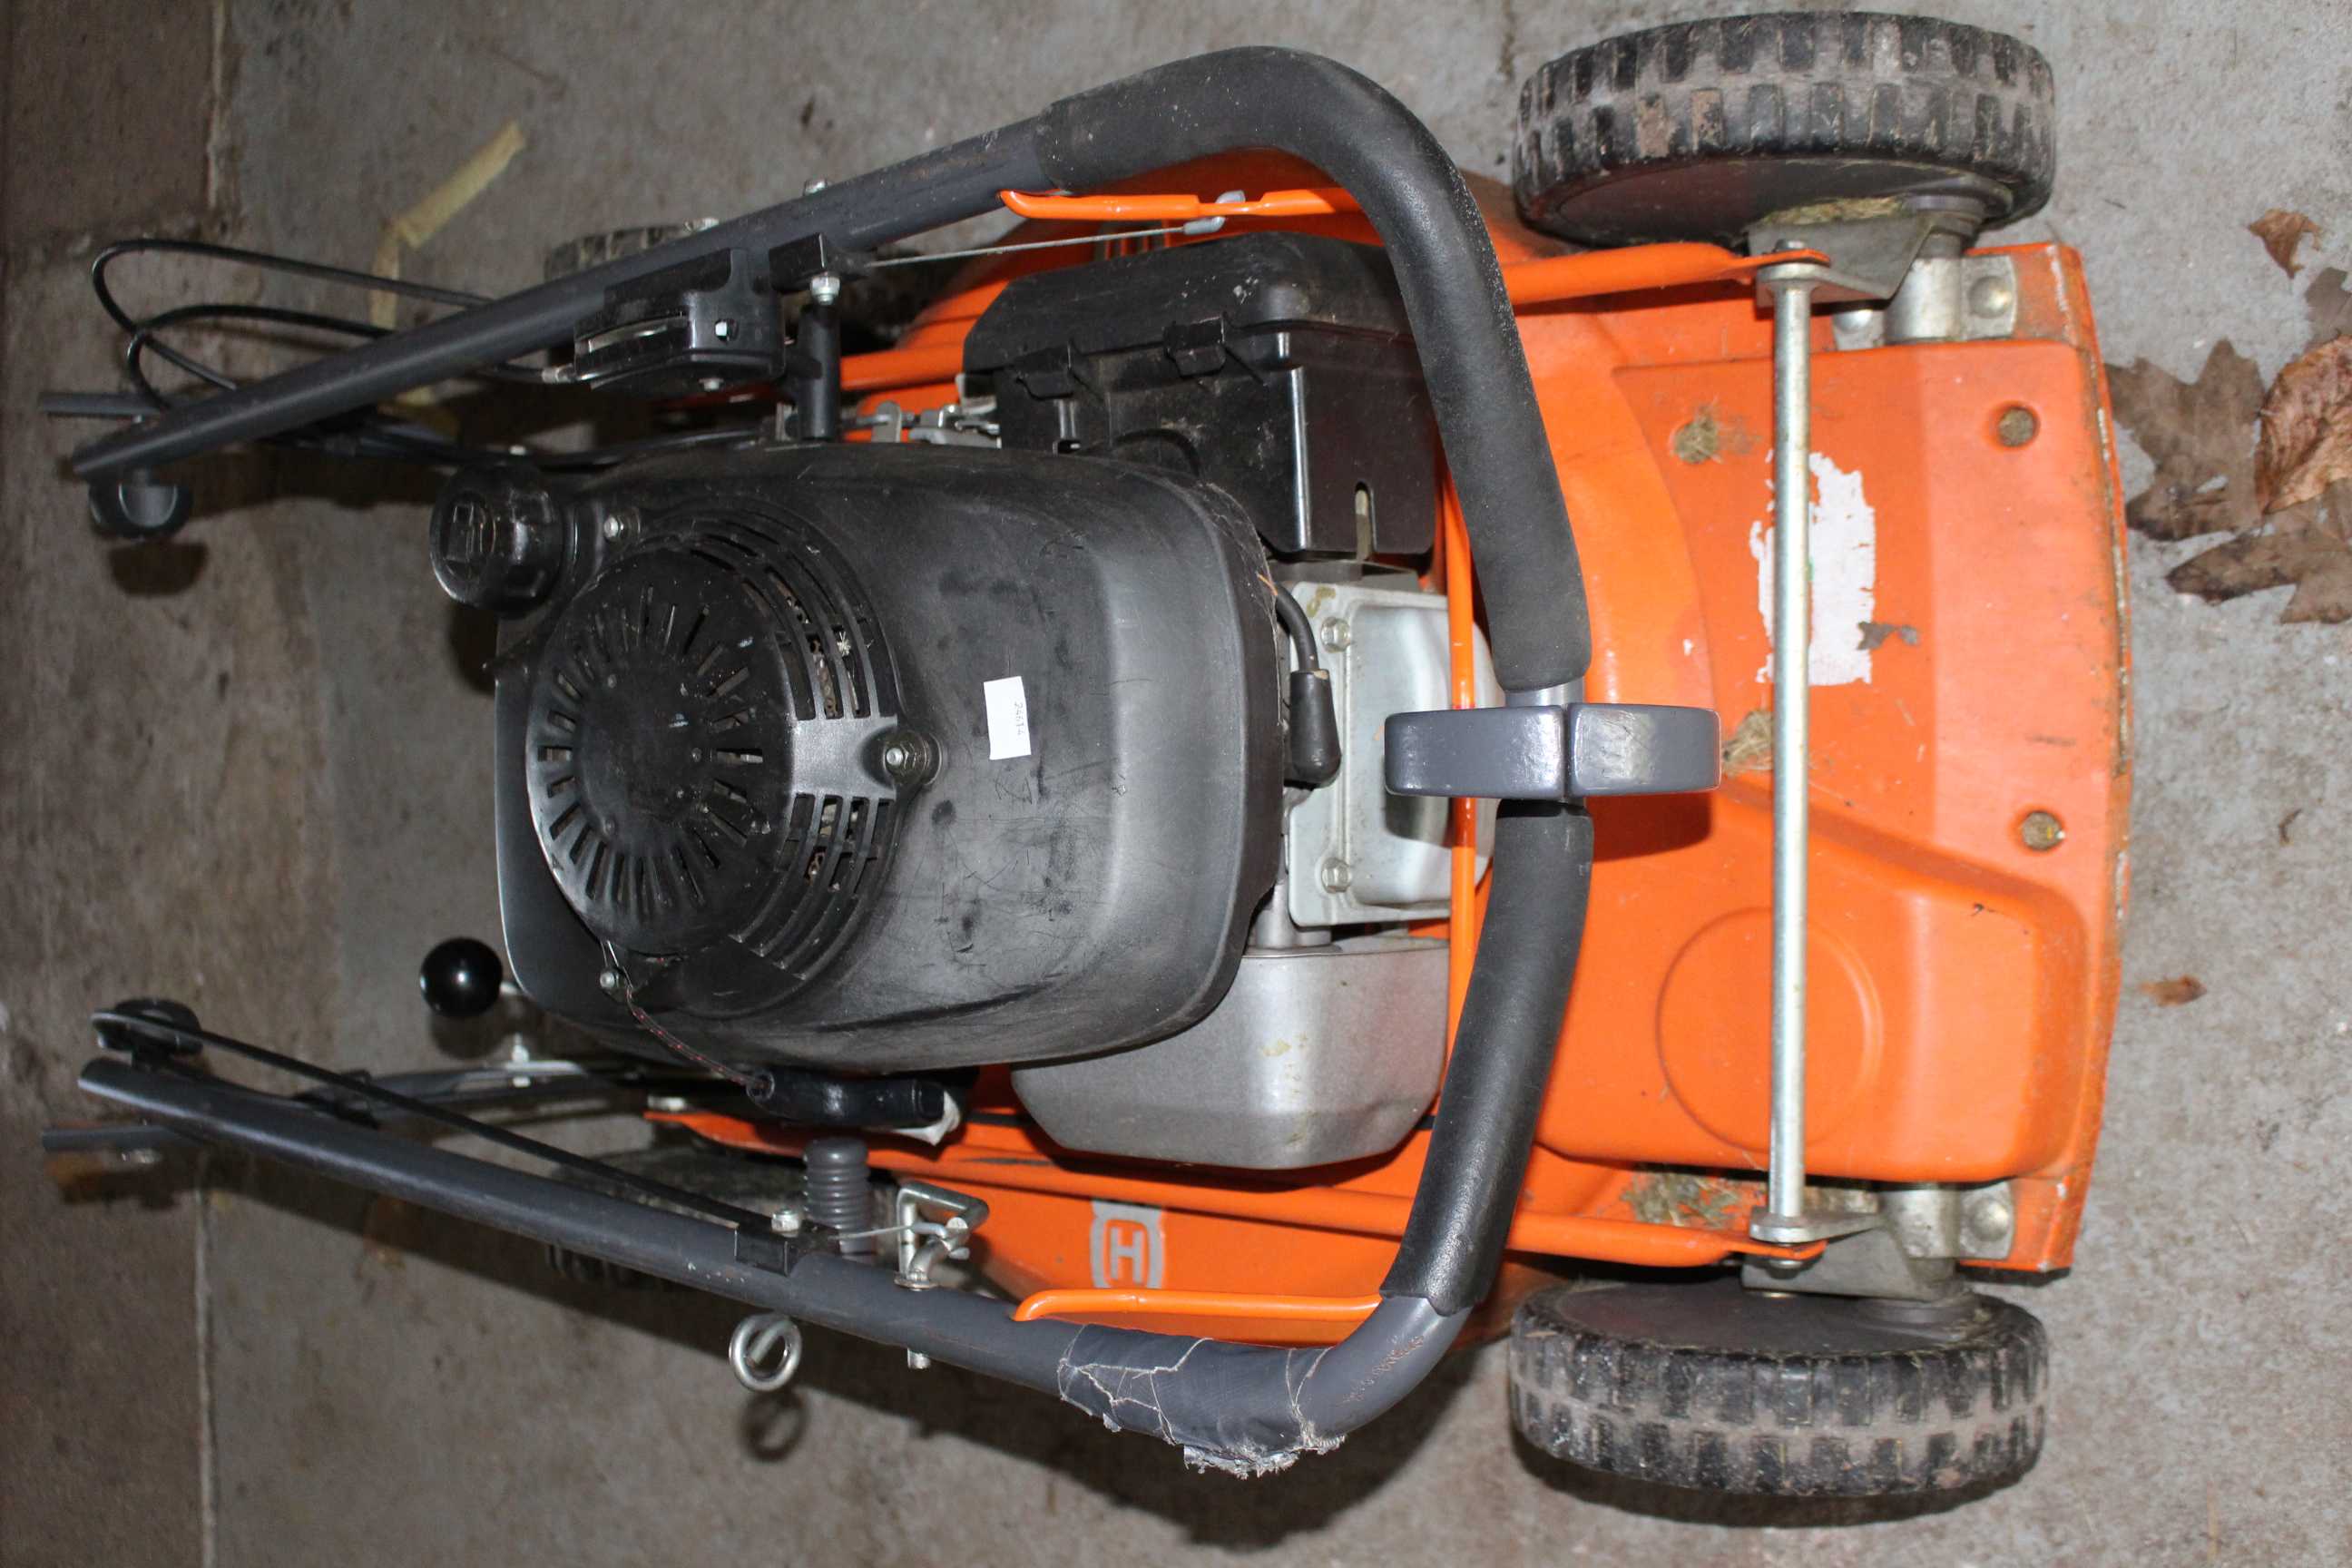 Husqvarna pull start petrol lawn mower with large cutting area. (selling as untested) - Image 2 of 4